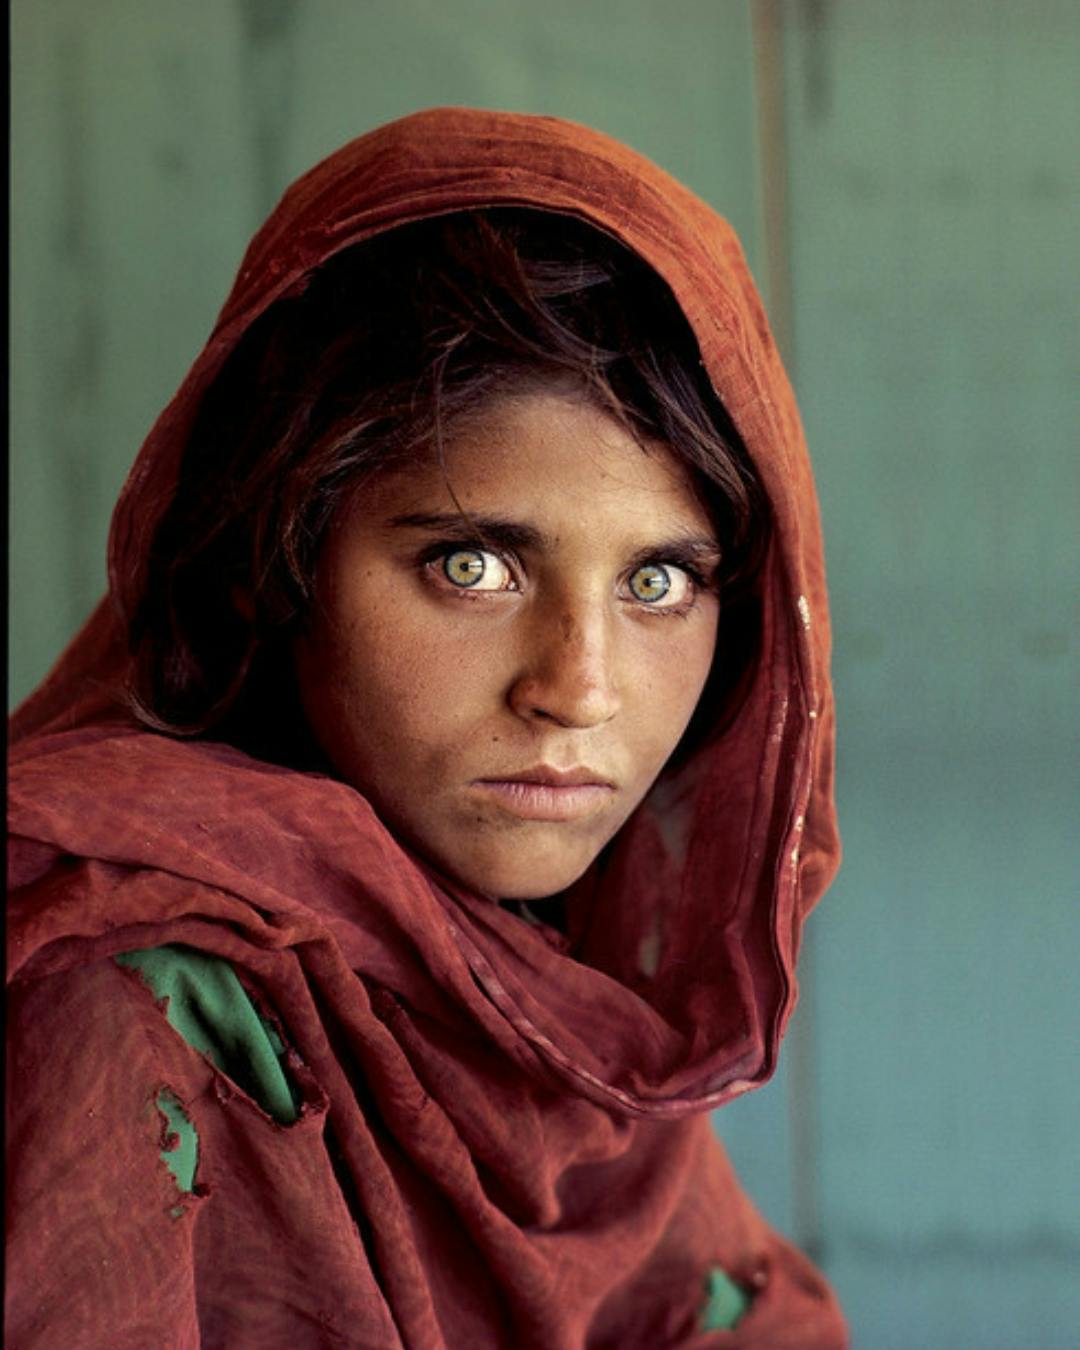 Girl with green eyes with a red scarf.